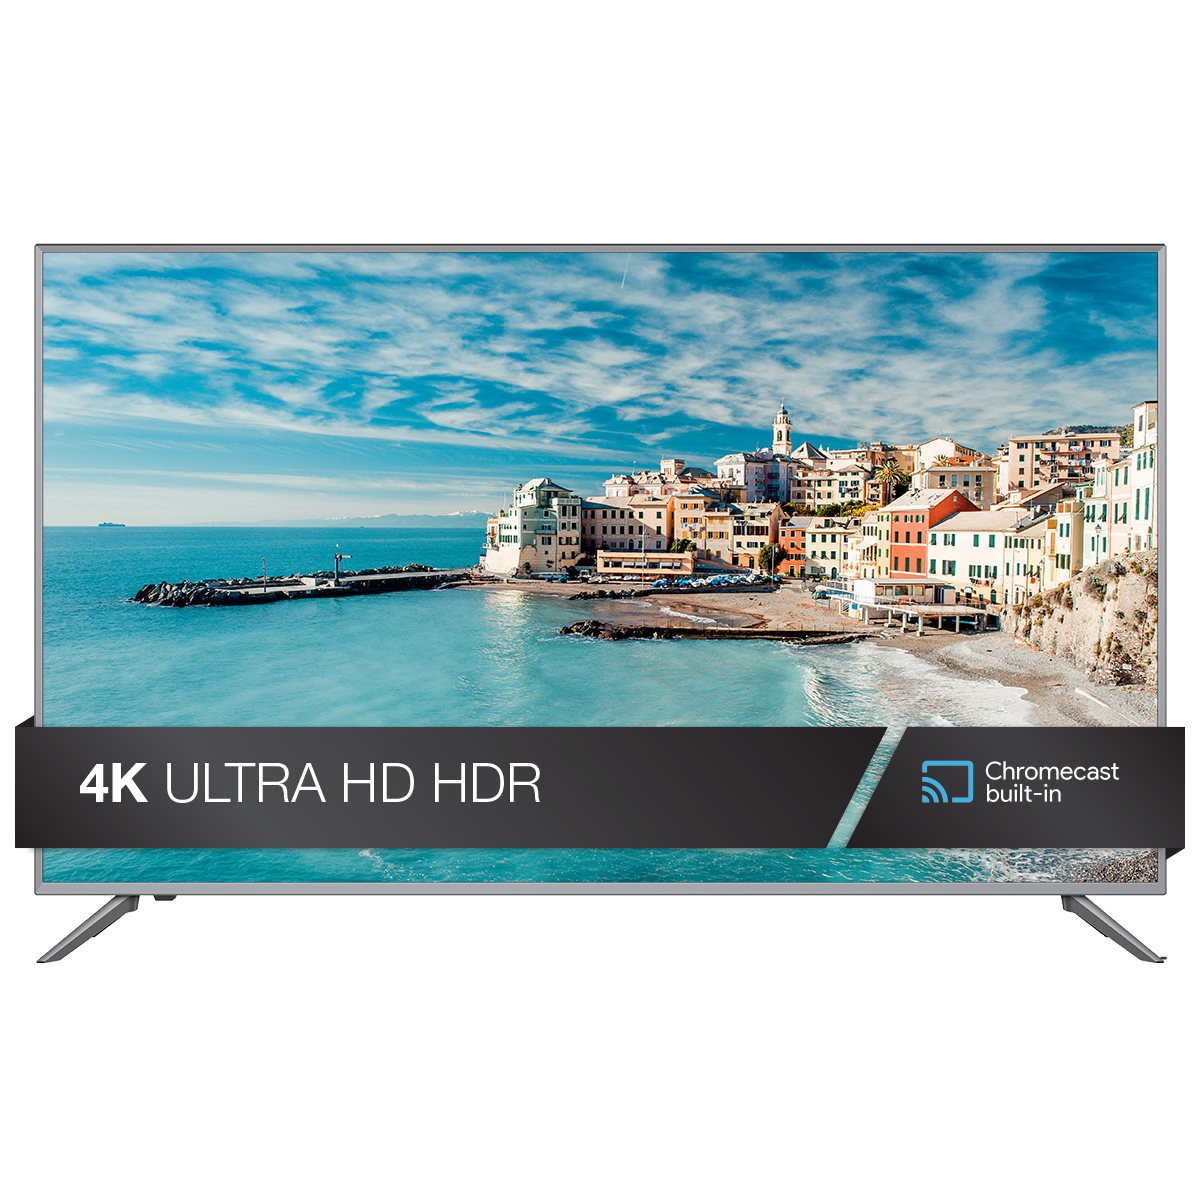 JVC 55" Class 4K Ultra HD (2160P) HDR Smart LED TV with Built-in Chromecast (LT-55MA875) - image 1 of 8